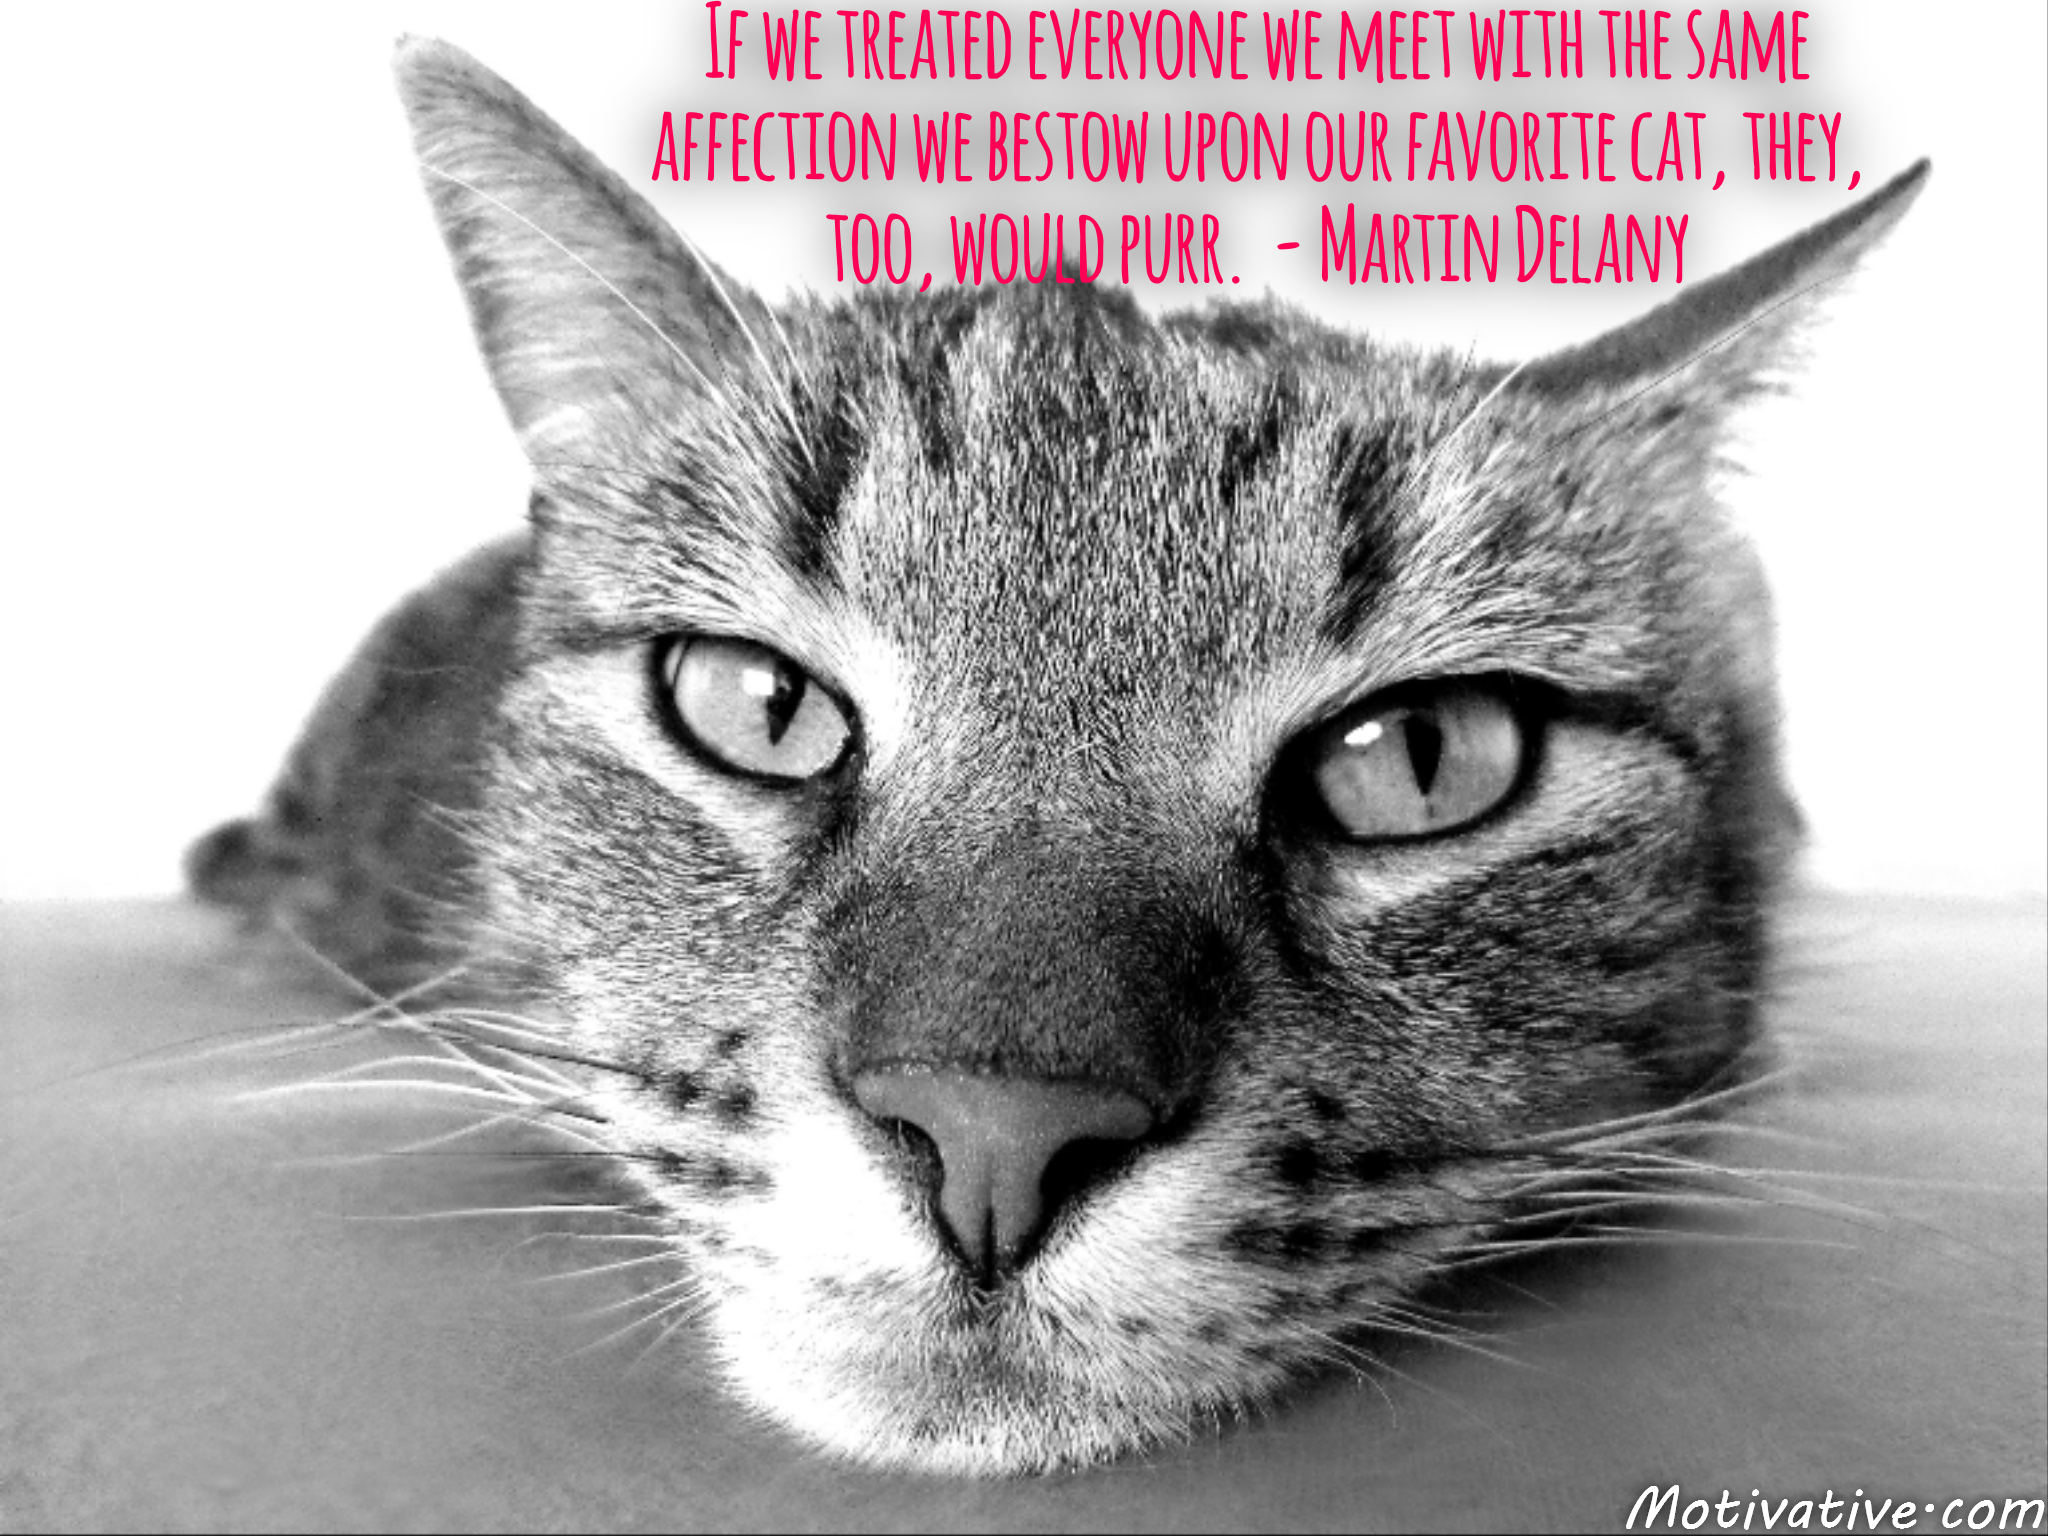 If we treated everyone we meet with the same affection we bestow upon our favorite cat, they, too, would purr.  – Martin Delany